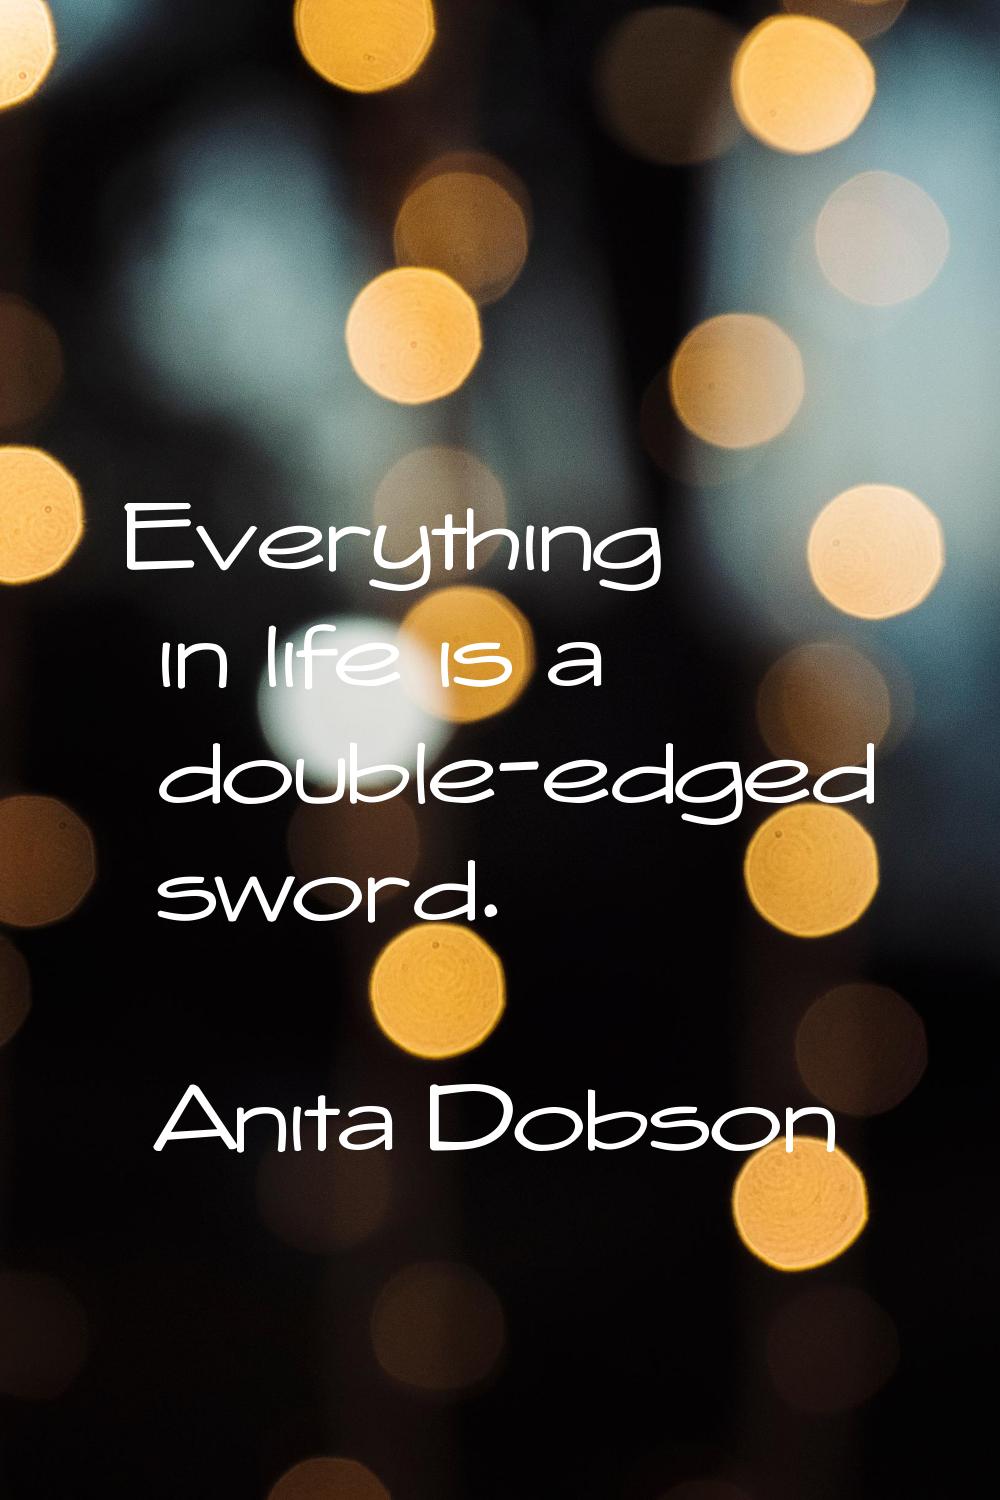 Everything in life is a double-edged sword.